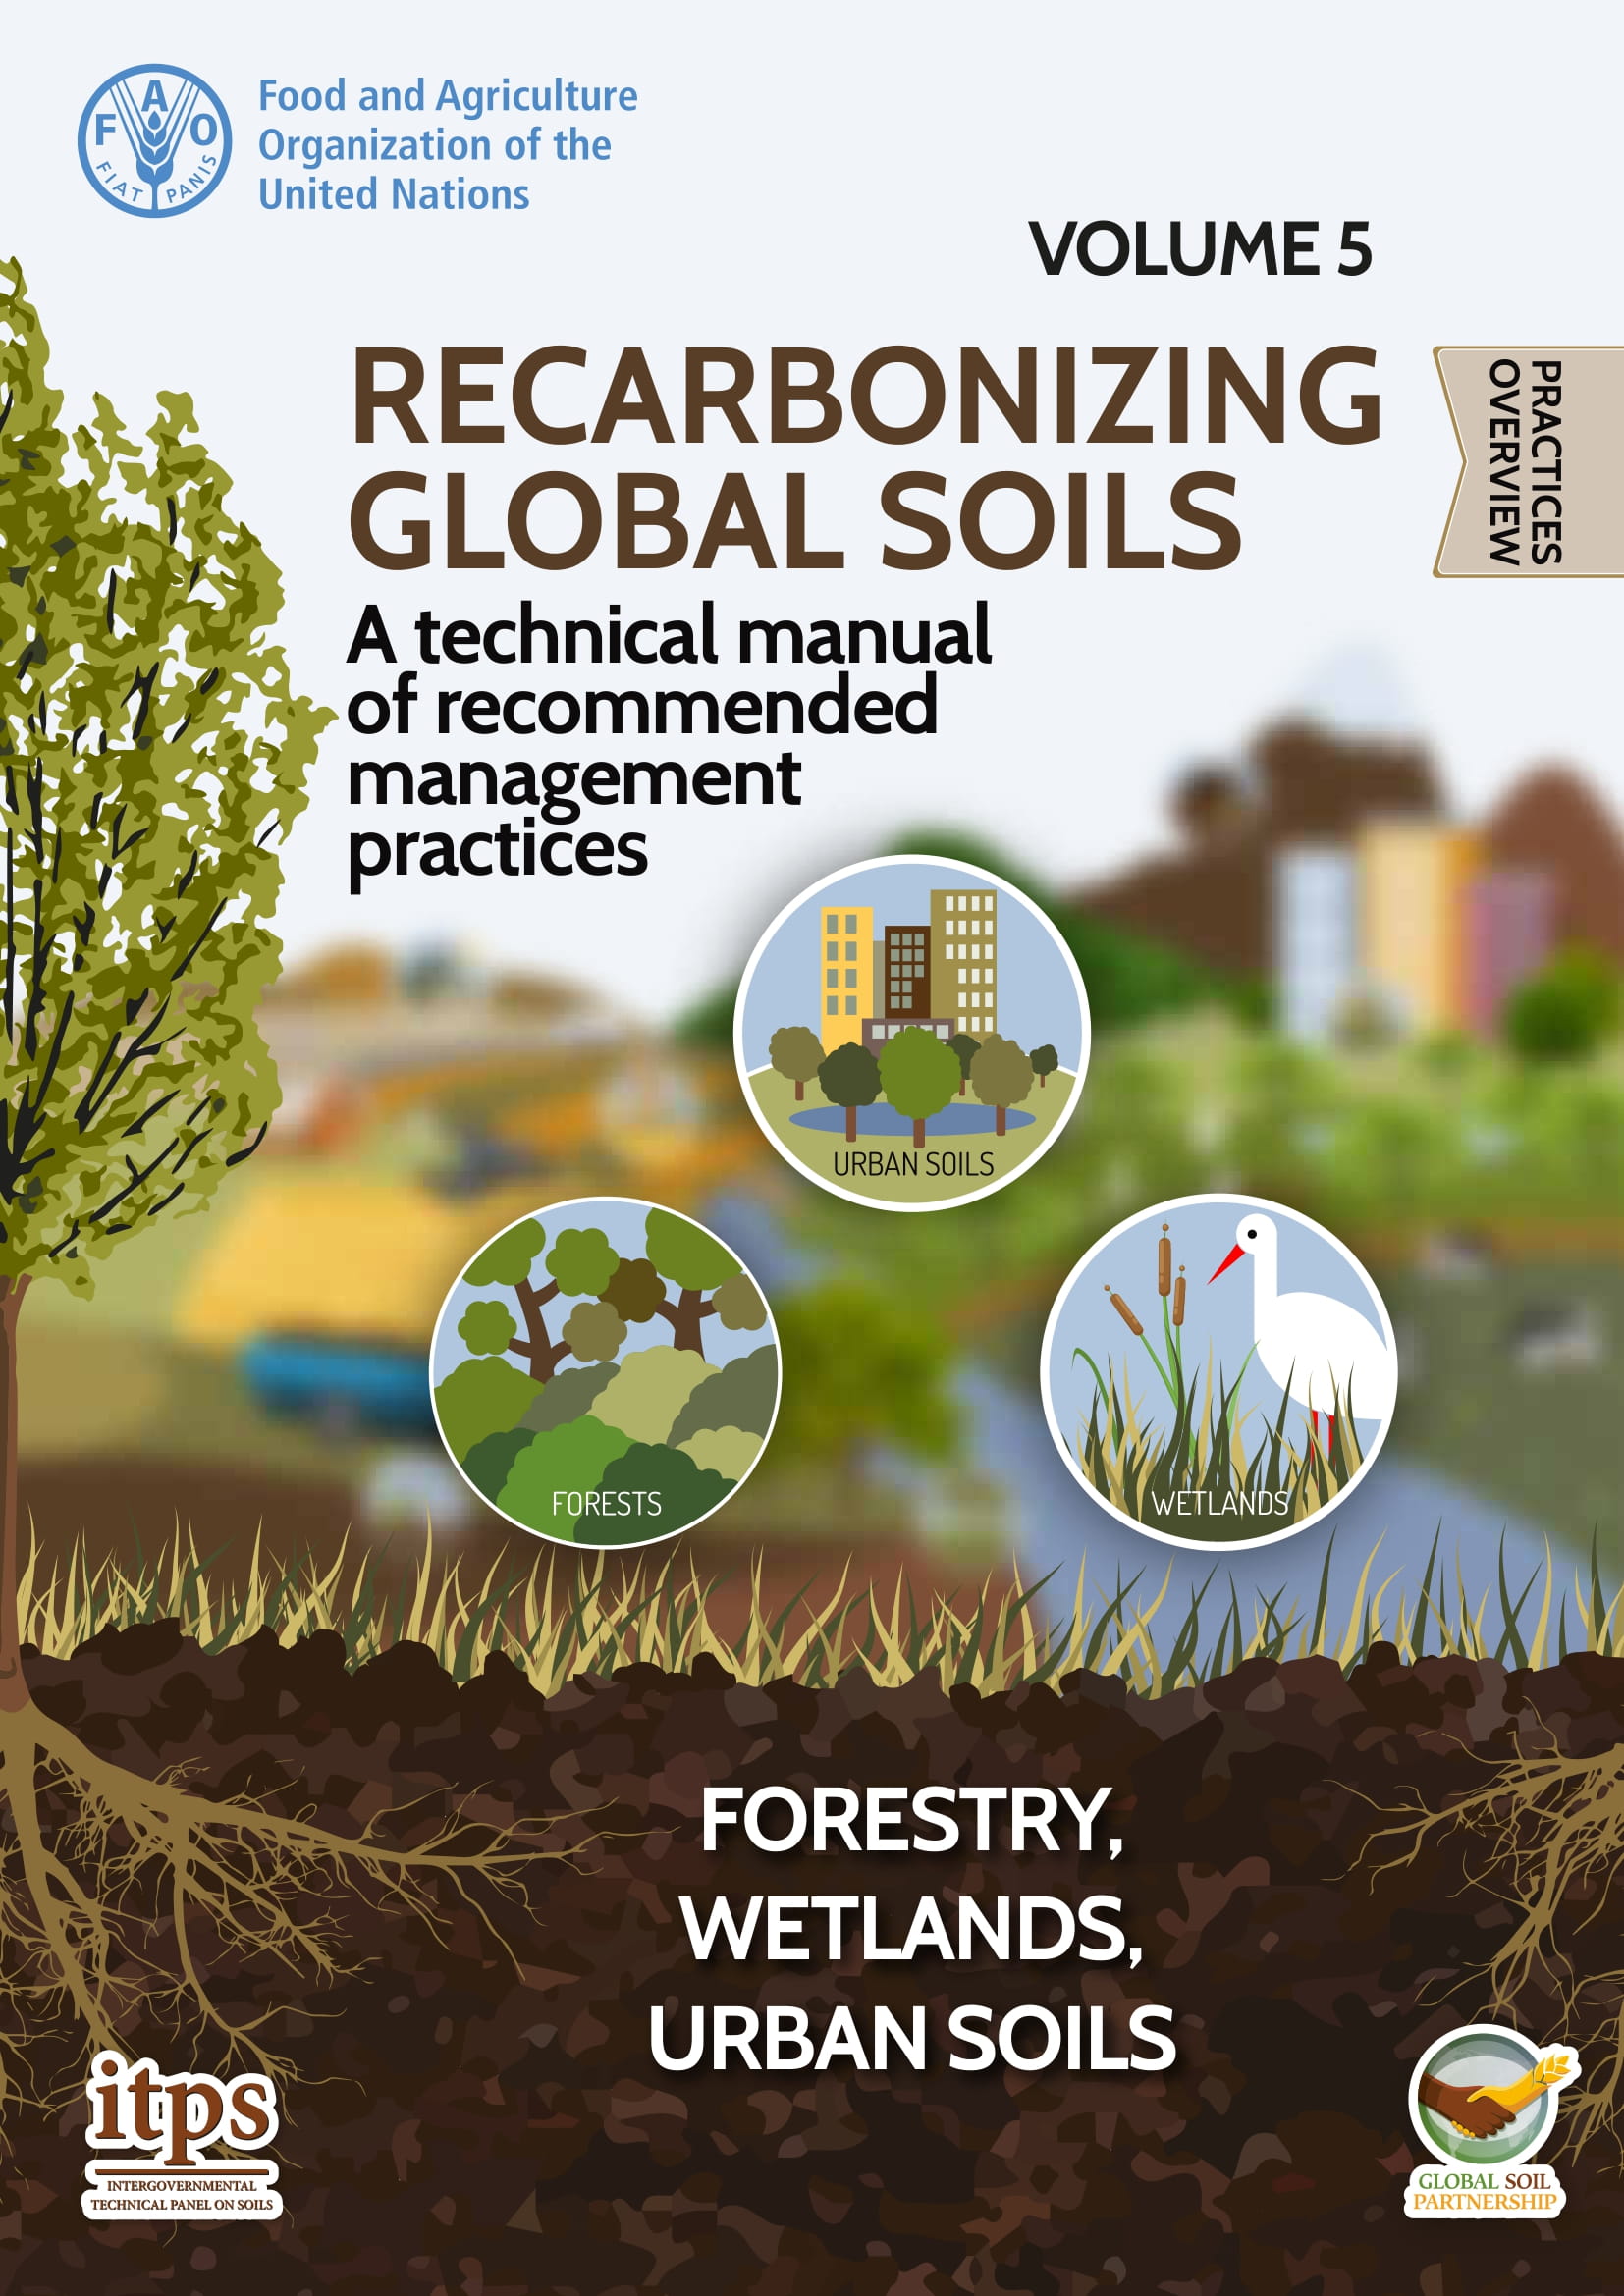 Recarbonizing global soils – A technical manual of recommended management practices